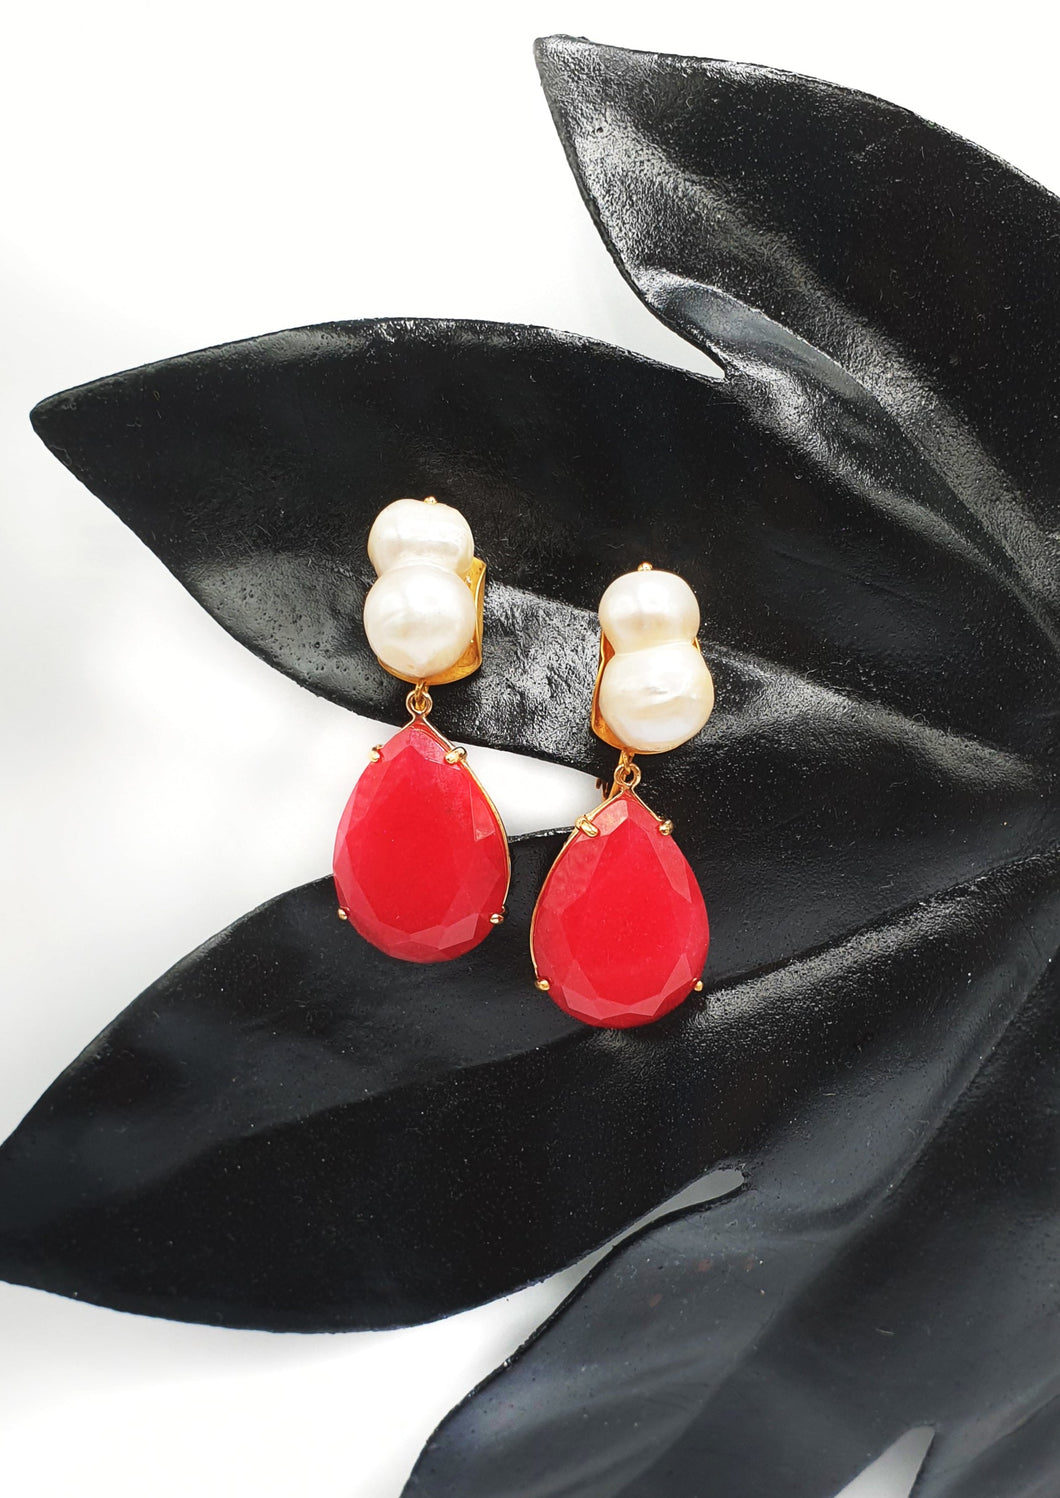 NEW clip-on earrings with double pearls and jade cabouchon drop